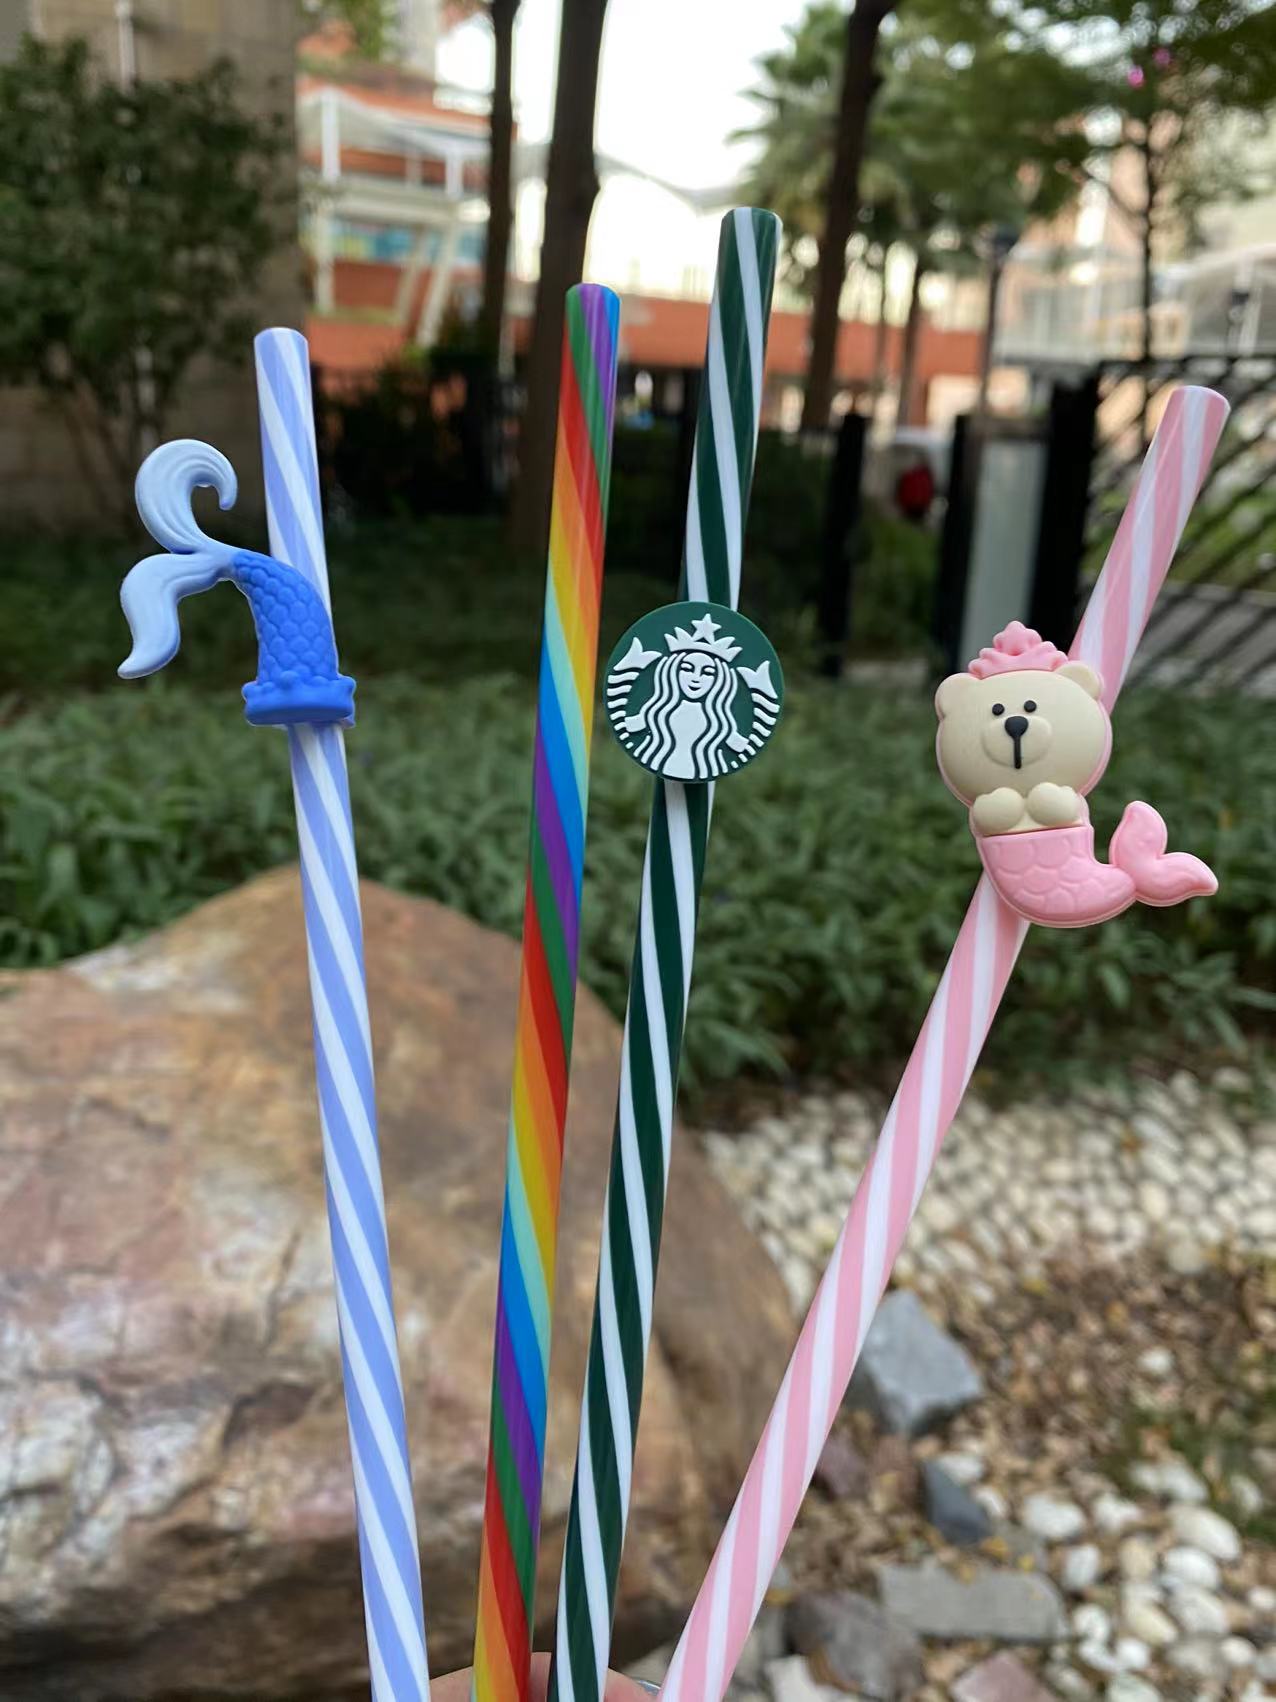 Bunny Bear and Alpaca Straw Toppers set of 3 for Tumbler, Straw Cup –  Starbucks Accessories